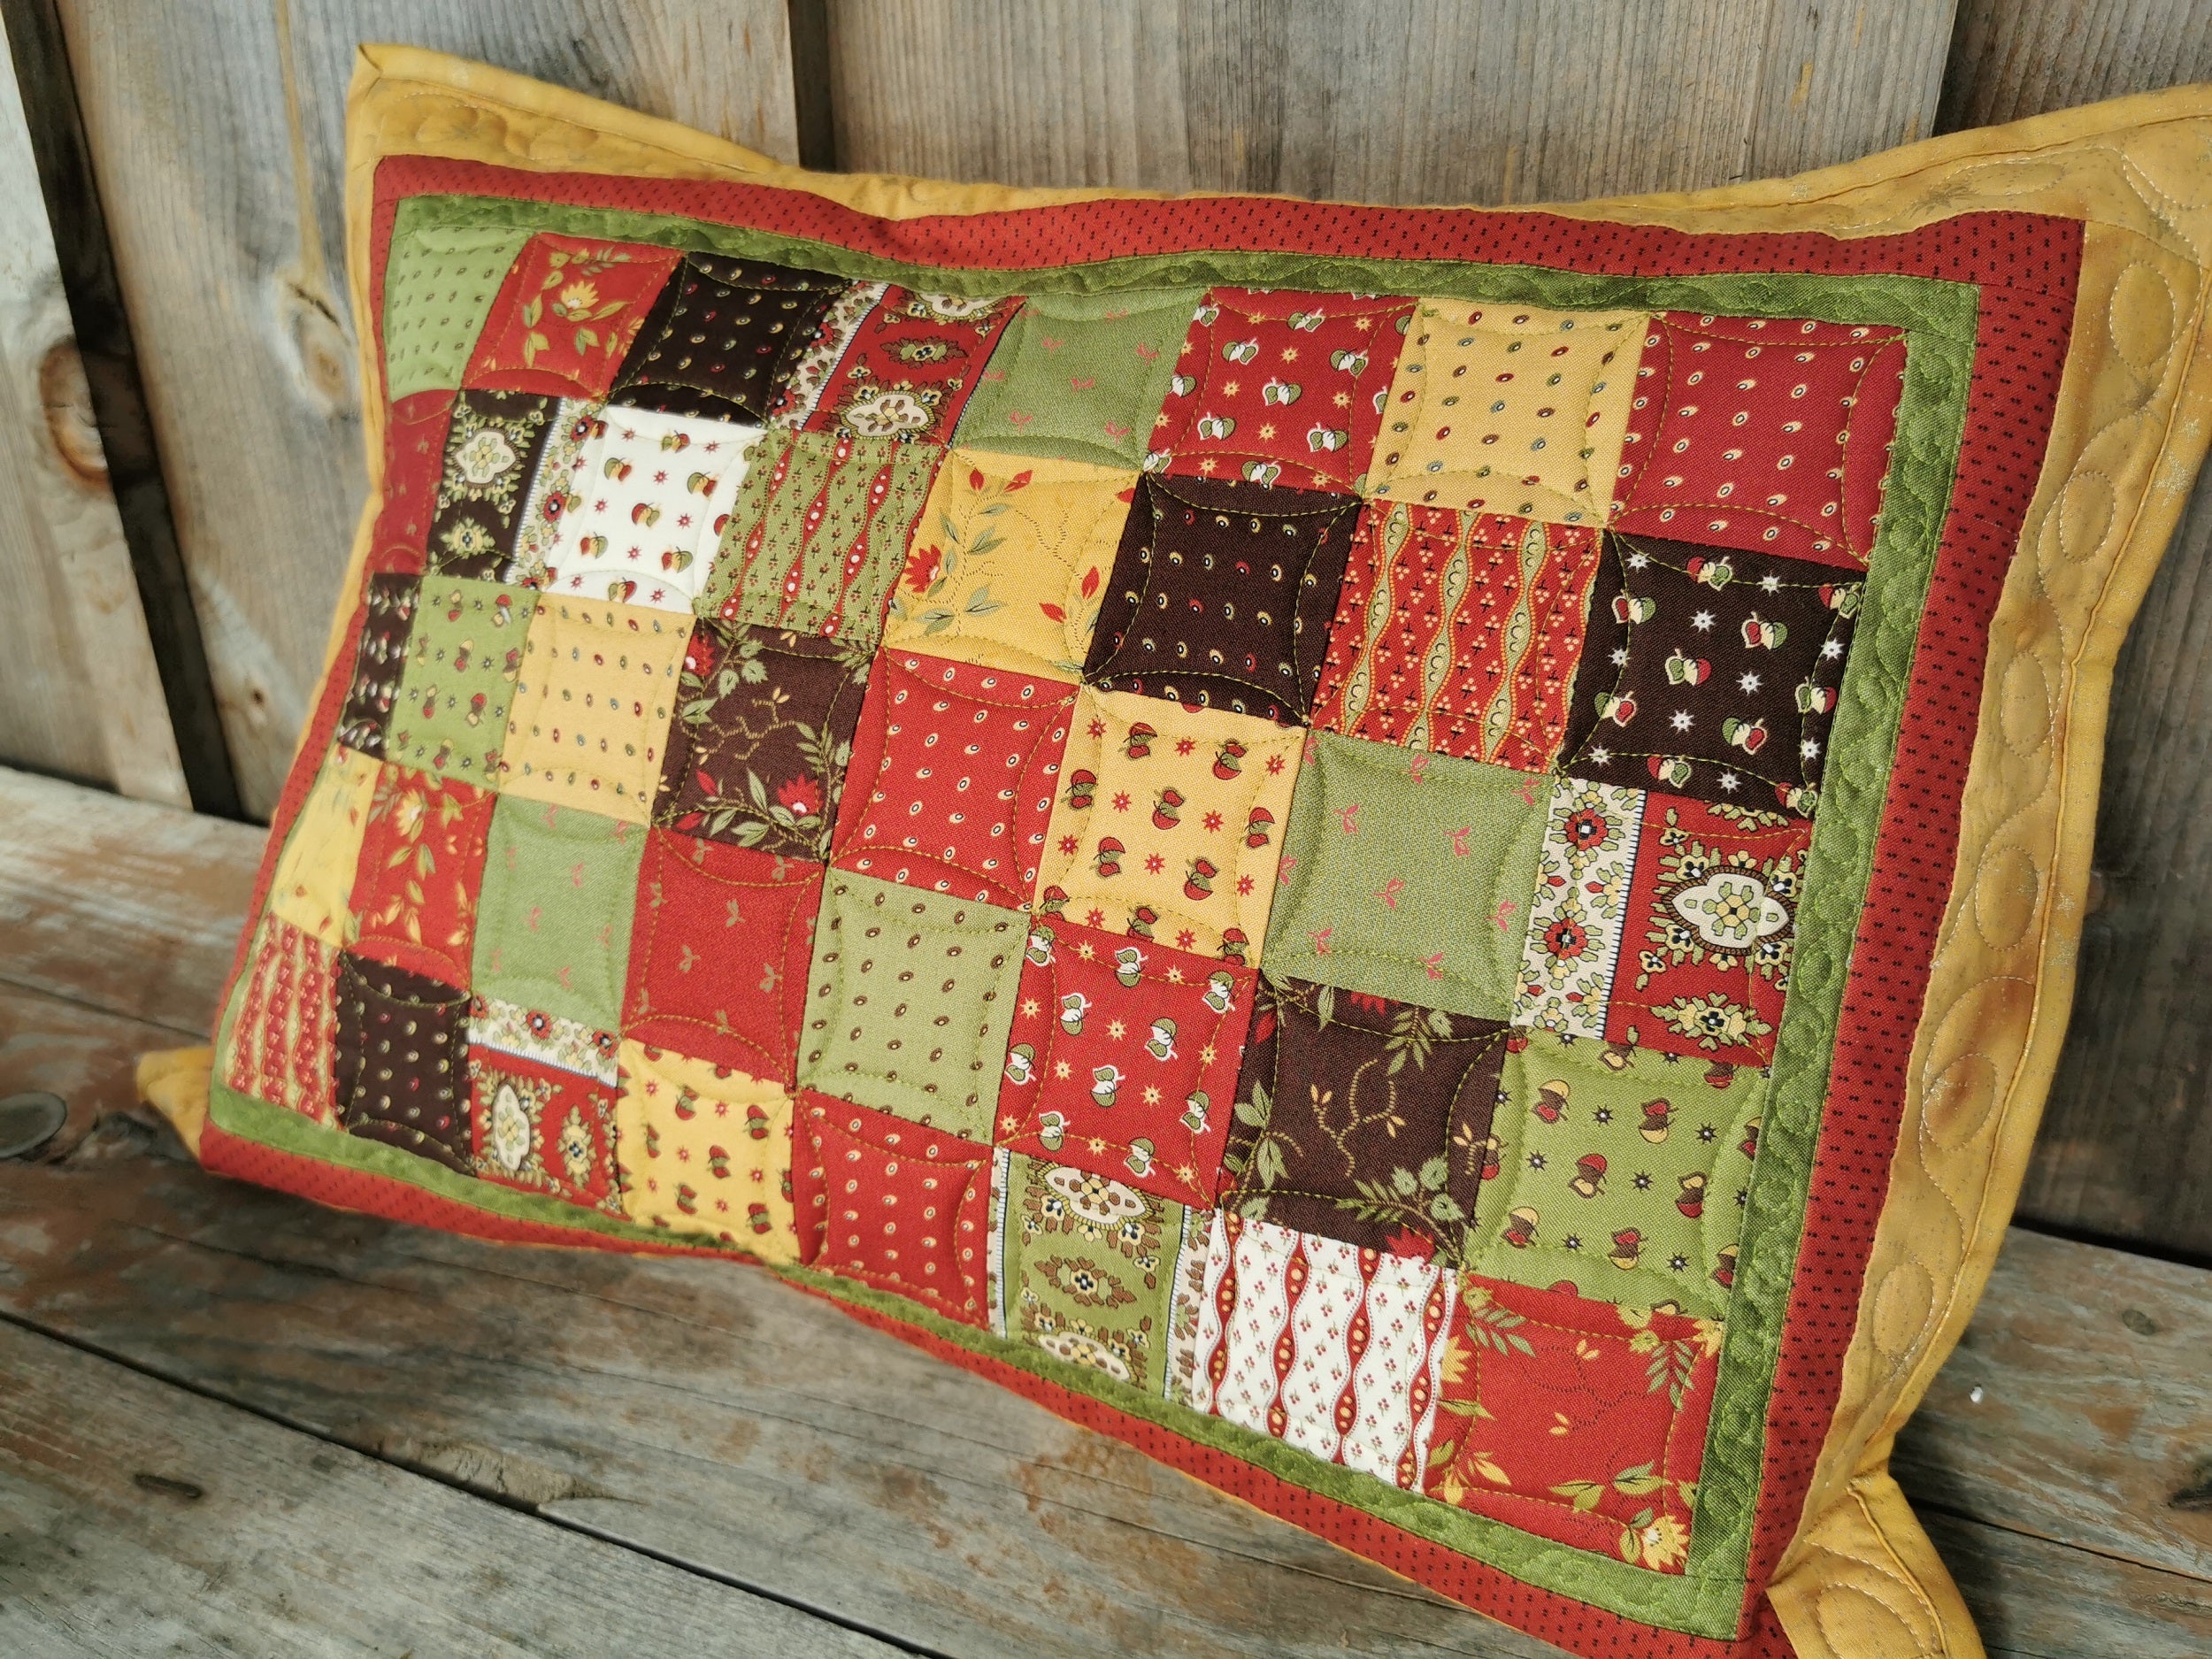 This rectangle throw pillow is shown propped on a wooden table. Cushion colors are somewhat Christmassy. Simple patchwork squares are in the colors red, gold, green and a touch of dark brown and are warm and welcoming.